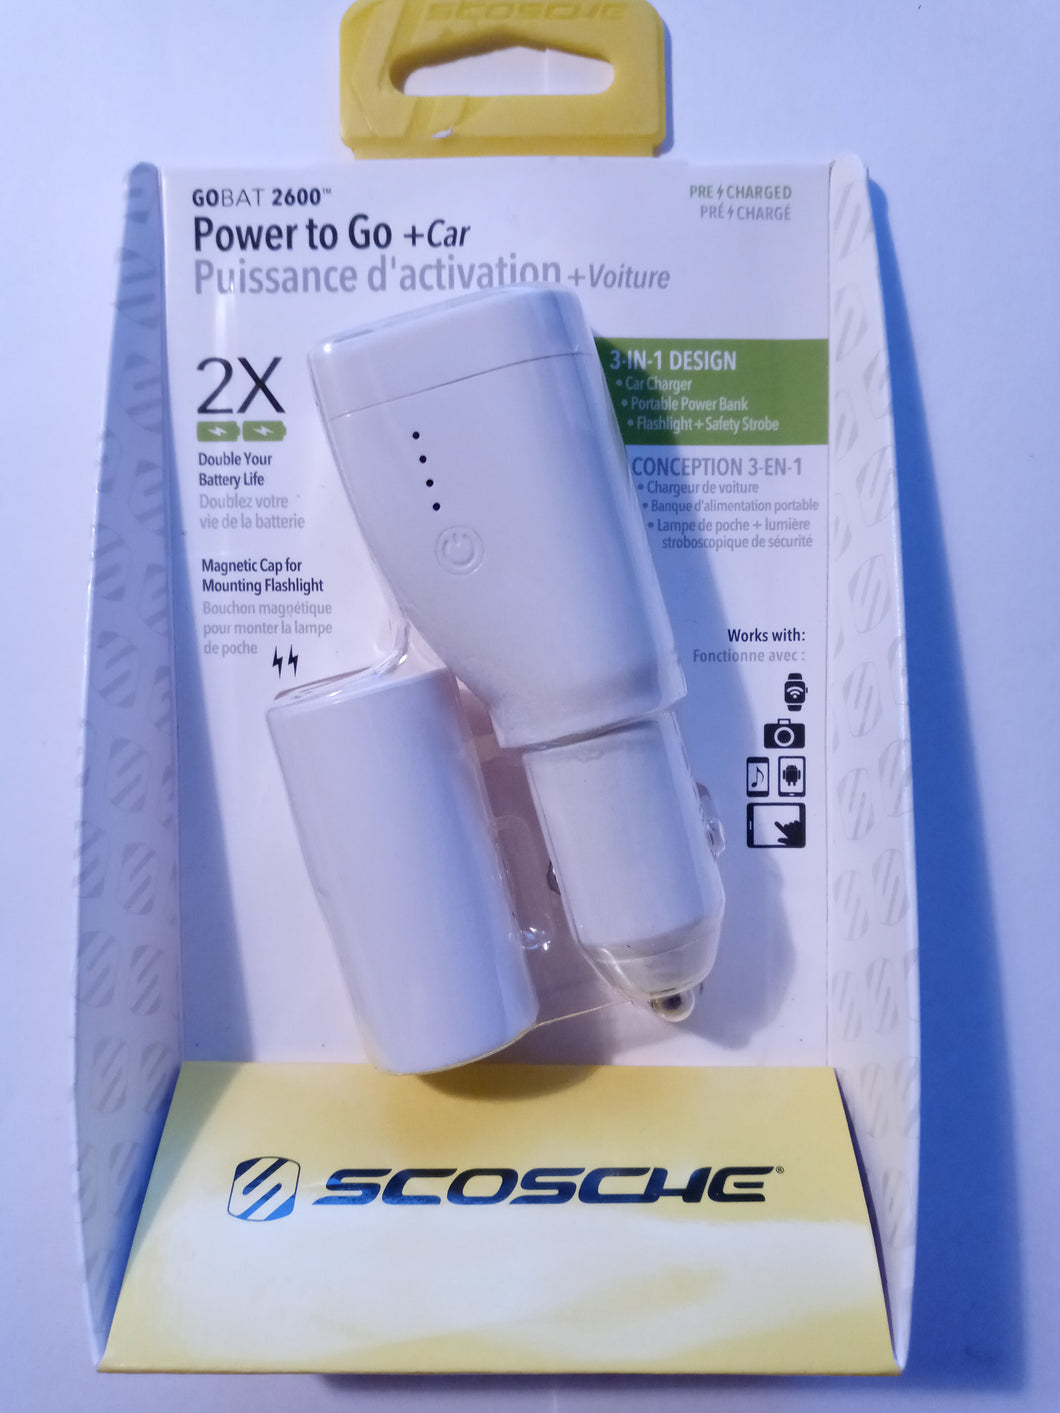 SCOSCHE POWER TO GO + CAR GOBAT 2600 3-IN-1 CHARGER